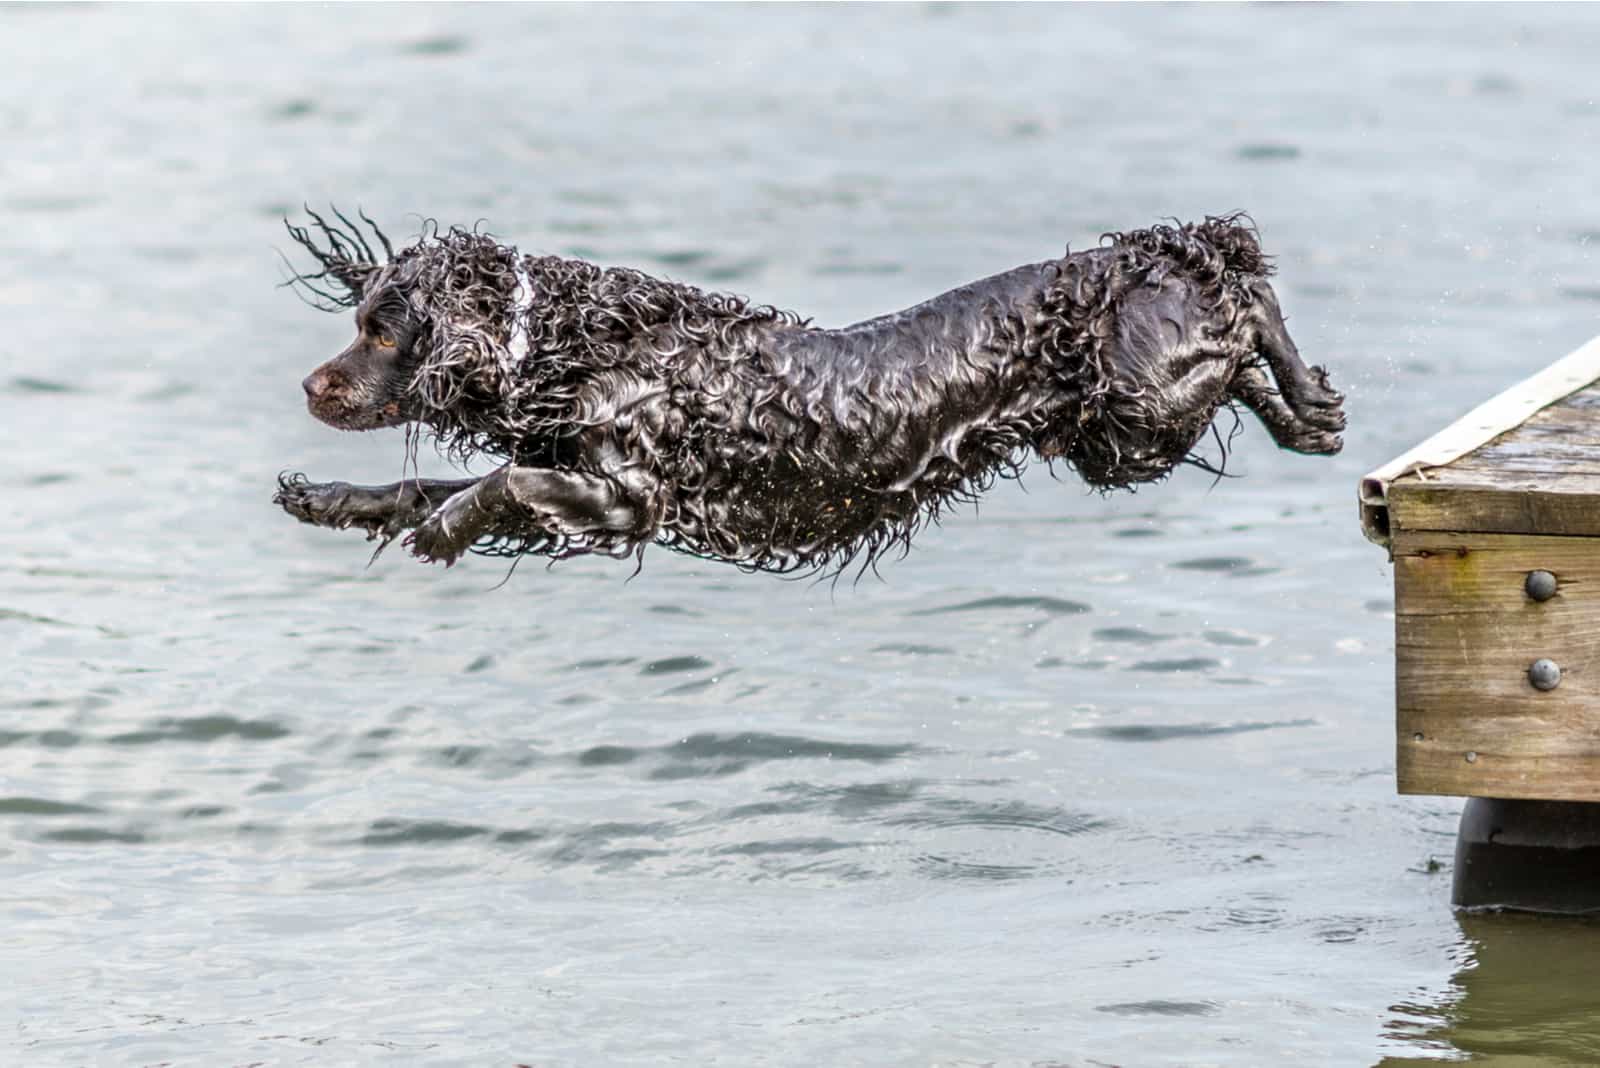 Boykin Spaniel jumps into the water from the dock